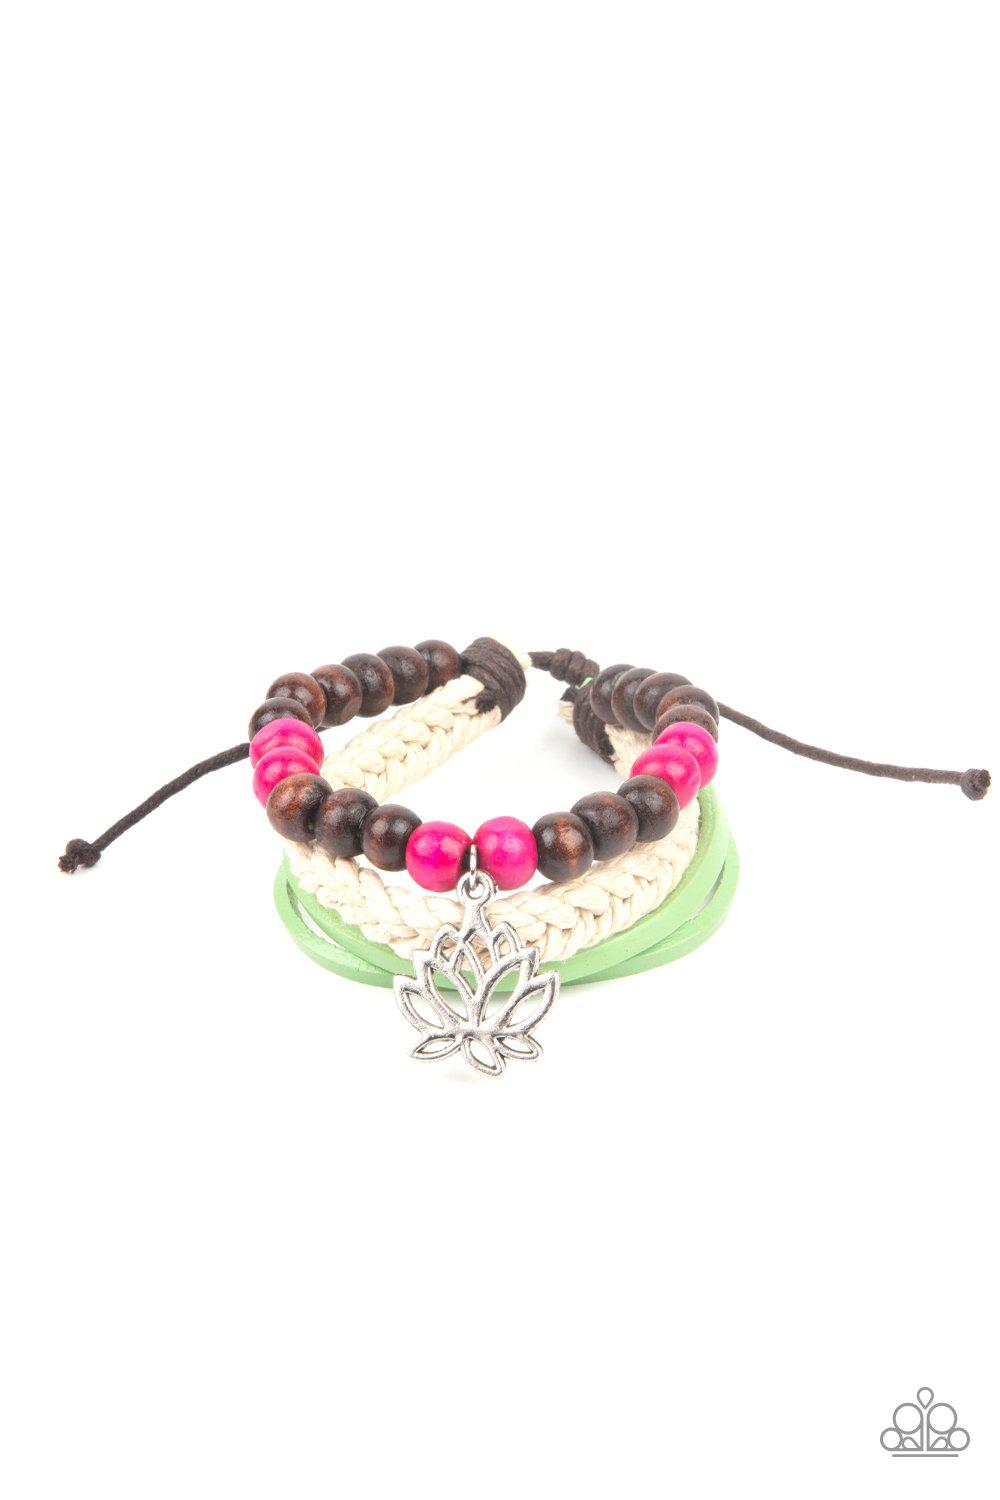 Lotus Beach Pink, Wood and Green Leather Urban Knot Bracelet - Paparazzi Accessories- lightbox - CarasShop.com - $5 Jewelry by Cara Jewels